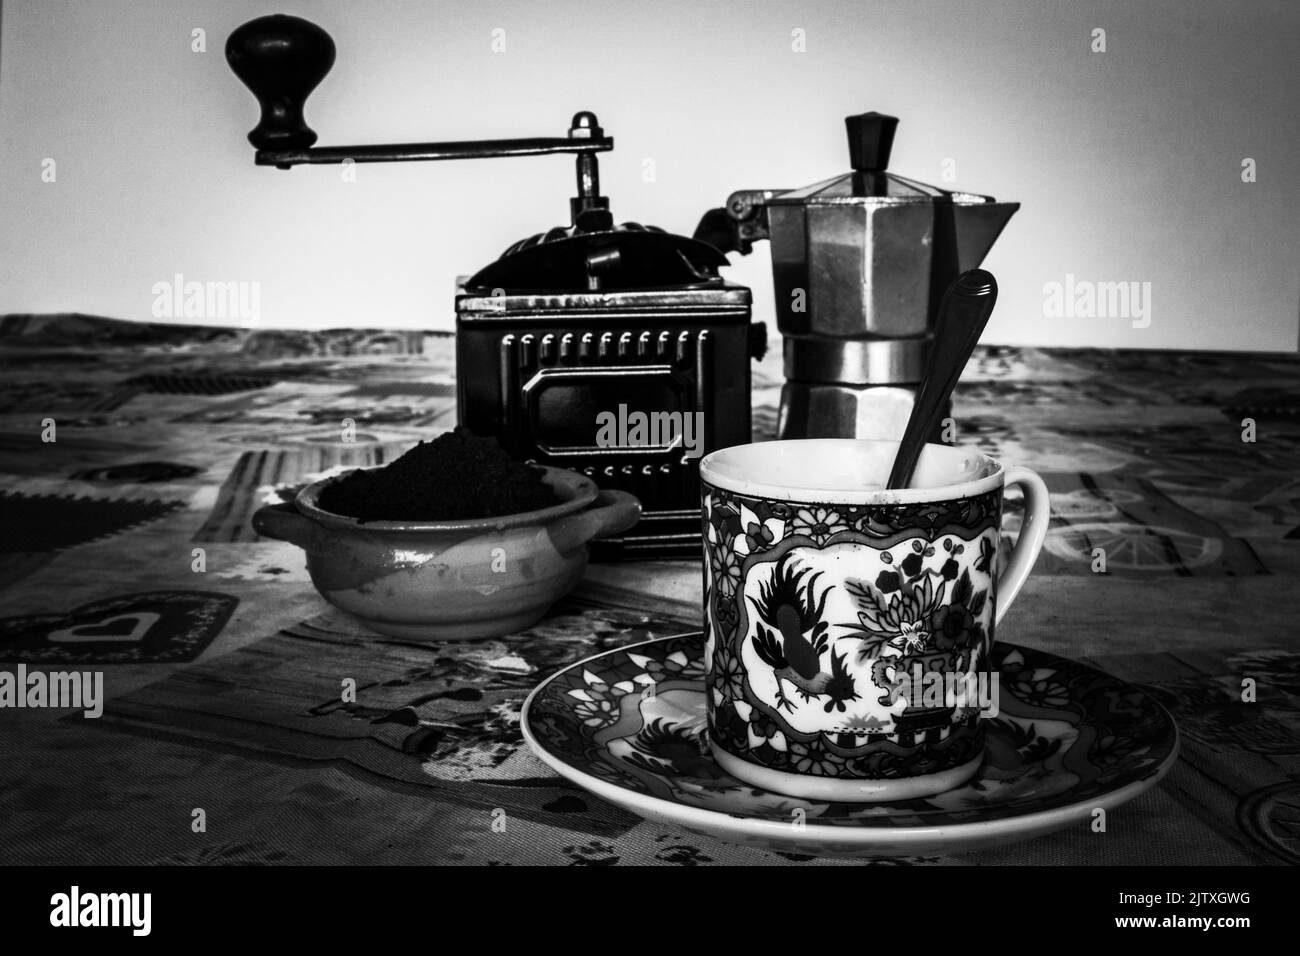 https://c8.alamy.com/comp/2JTXGWG/image-of-a-coffee-cup-a-coffee-grinder-and-a-mocha-machine-breakfast-with-an-espressovintage-black-and-white-photo-2JTXGWG.jpg